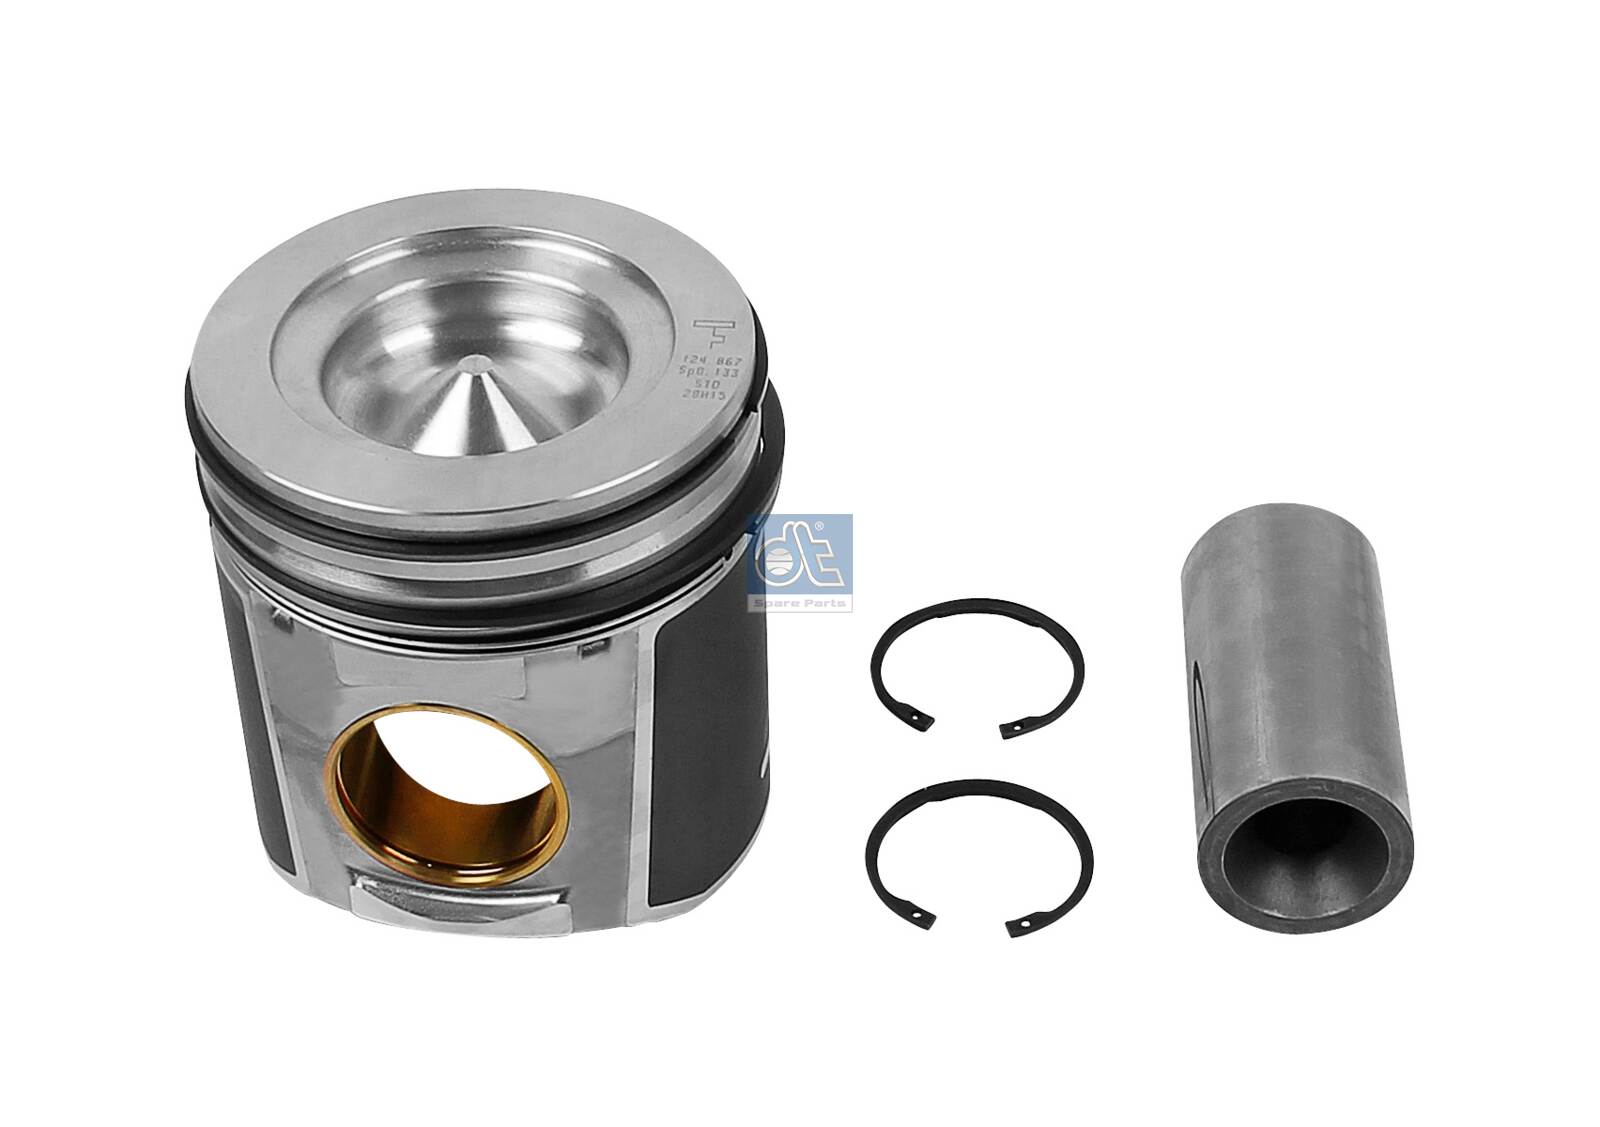 7.54658, Piston with rings and pin, DT Spare Parts, 2996141, 02997436, 02996796, 02996319, 2997436, 2996796, 2996319, 500054837, 500054838, 02996141, 065.156, 103712, 120480, 4047755912246, 41478600, 41478960, 065156, 782160/782165, 8743410000, 120482, 782190/782195, 87-434100-00, 782160782165, 852300, 782190782195, 7.54658